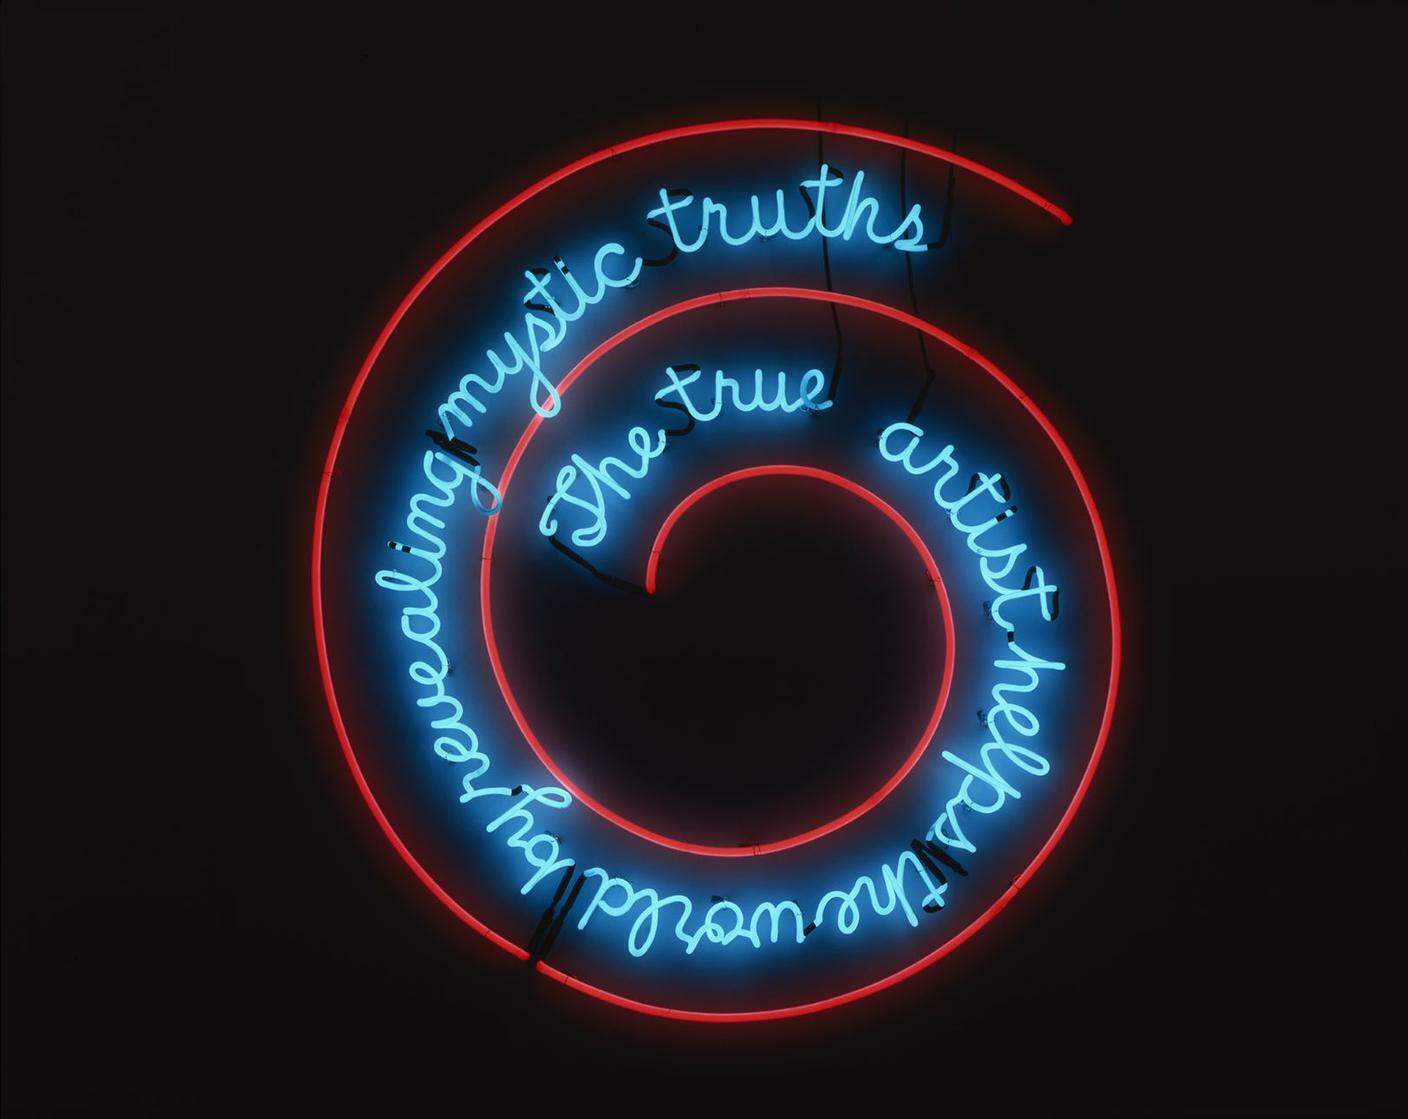 Bruce Nauman, The True Artist Helps the World by Revealing Mystic Truths, 1967. Kunstmuseum Basel 